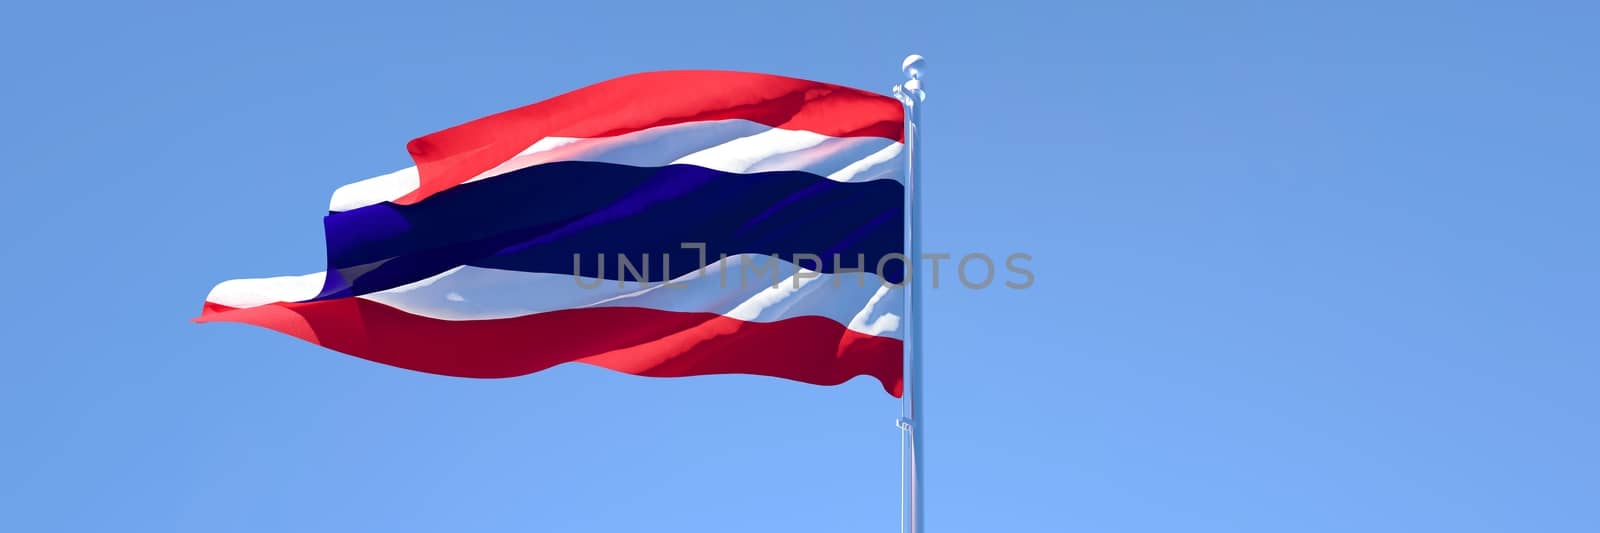 3D rendering of the national flag of Thailand waving in the wind against a blue sky